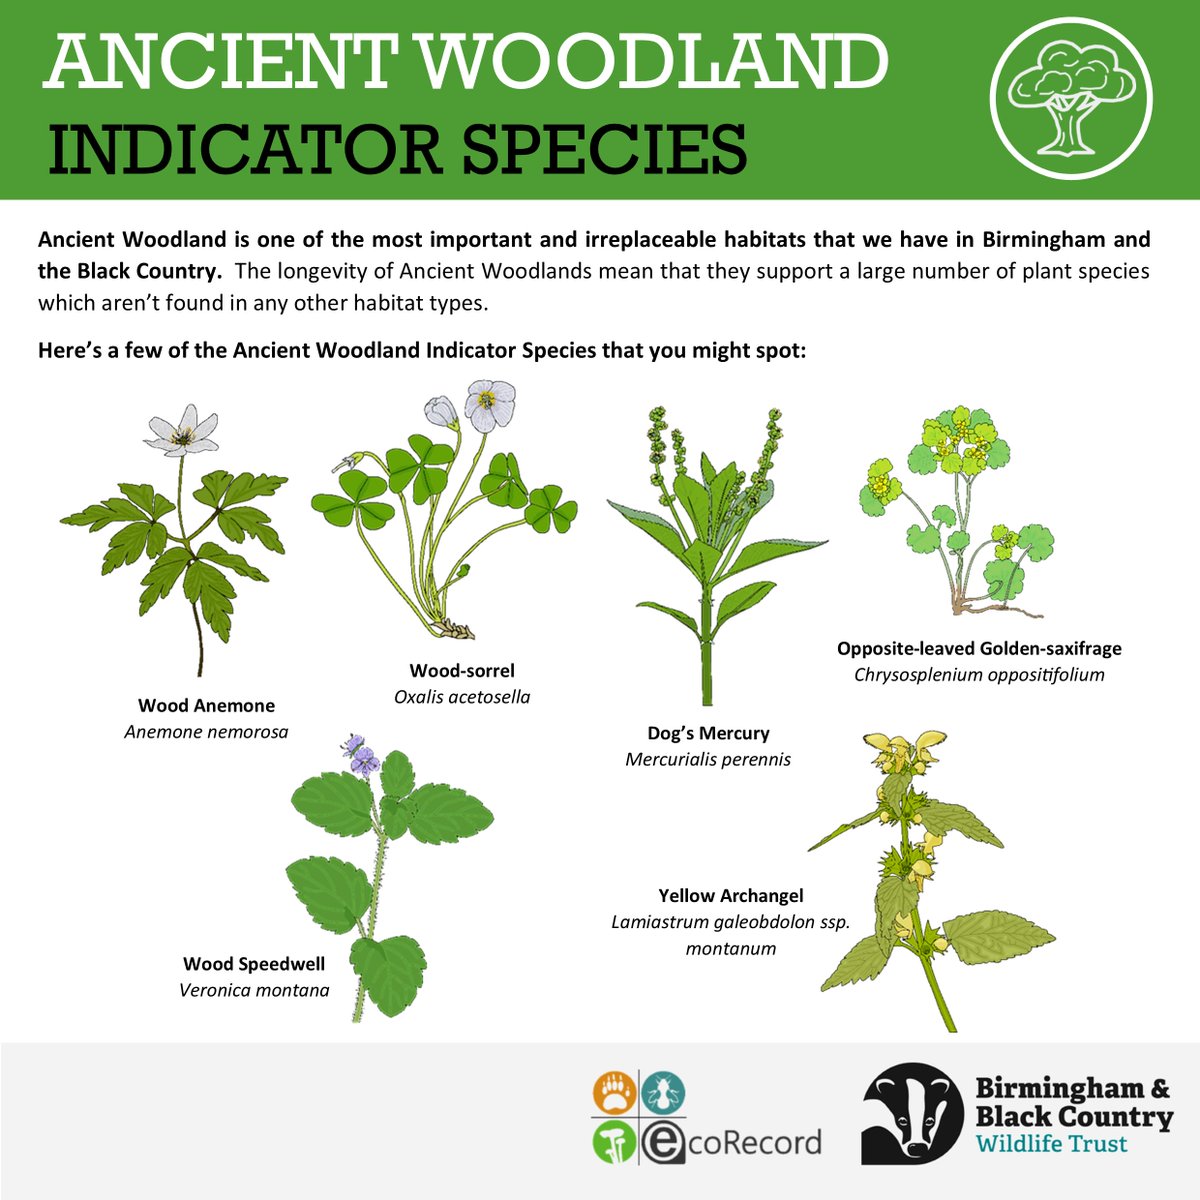 Have you been exploring any woodlands lately? You can submit your sightings to us via iNaturalist, or iRecord, via the EcoRecord website at ecorecord.org.uk or by emailing us at enquiries@ecorecord.org.uk. #flowers #nature #woodland #spring #wildlife #botany